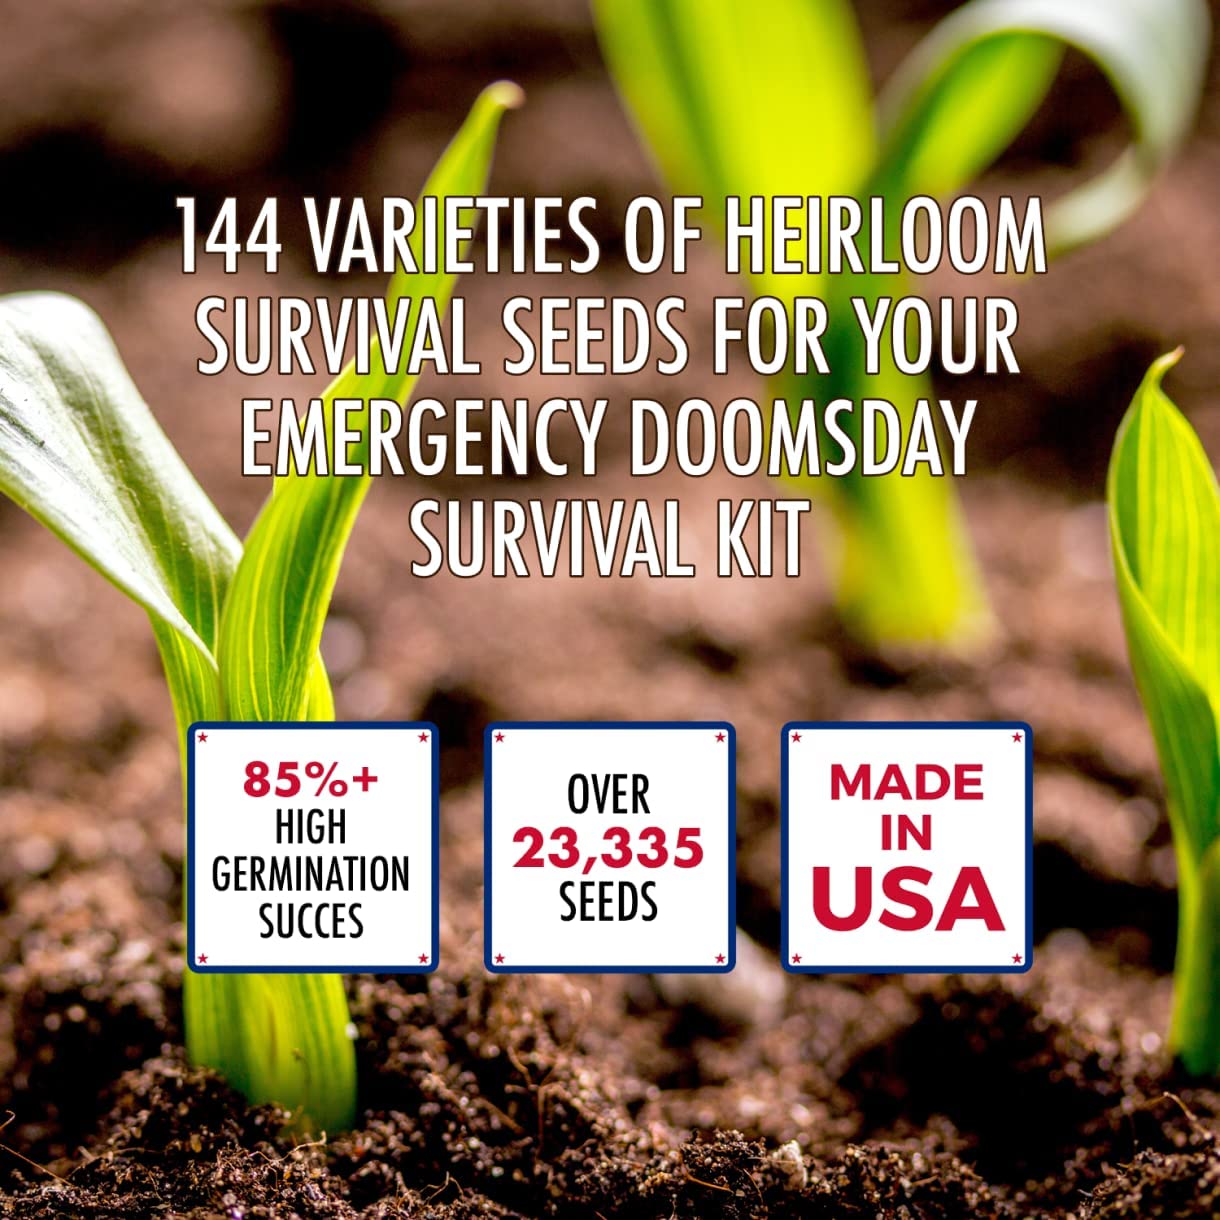 Image displaying 144 varieties of heirloom survival seeds for your emergency doomsday survival kit, showcasing diversity and preparedness